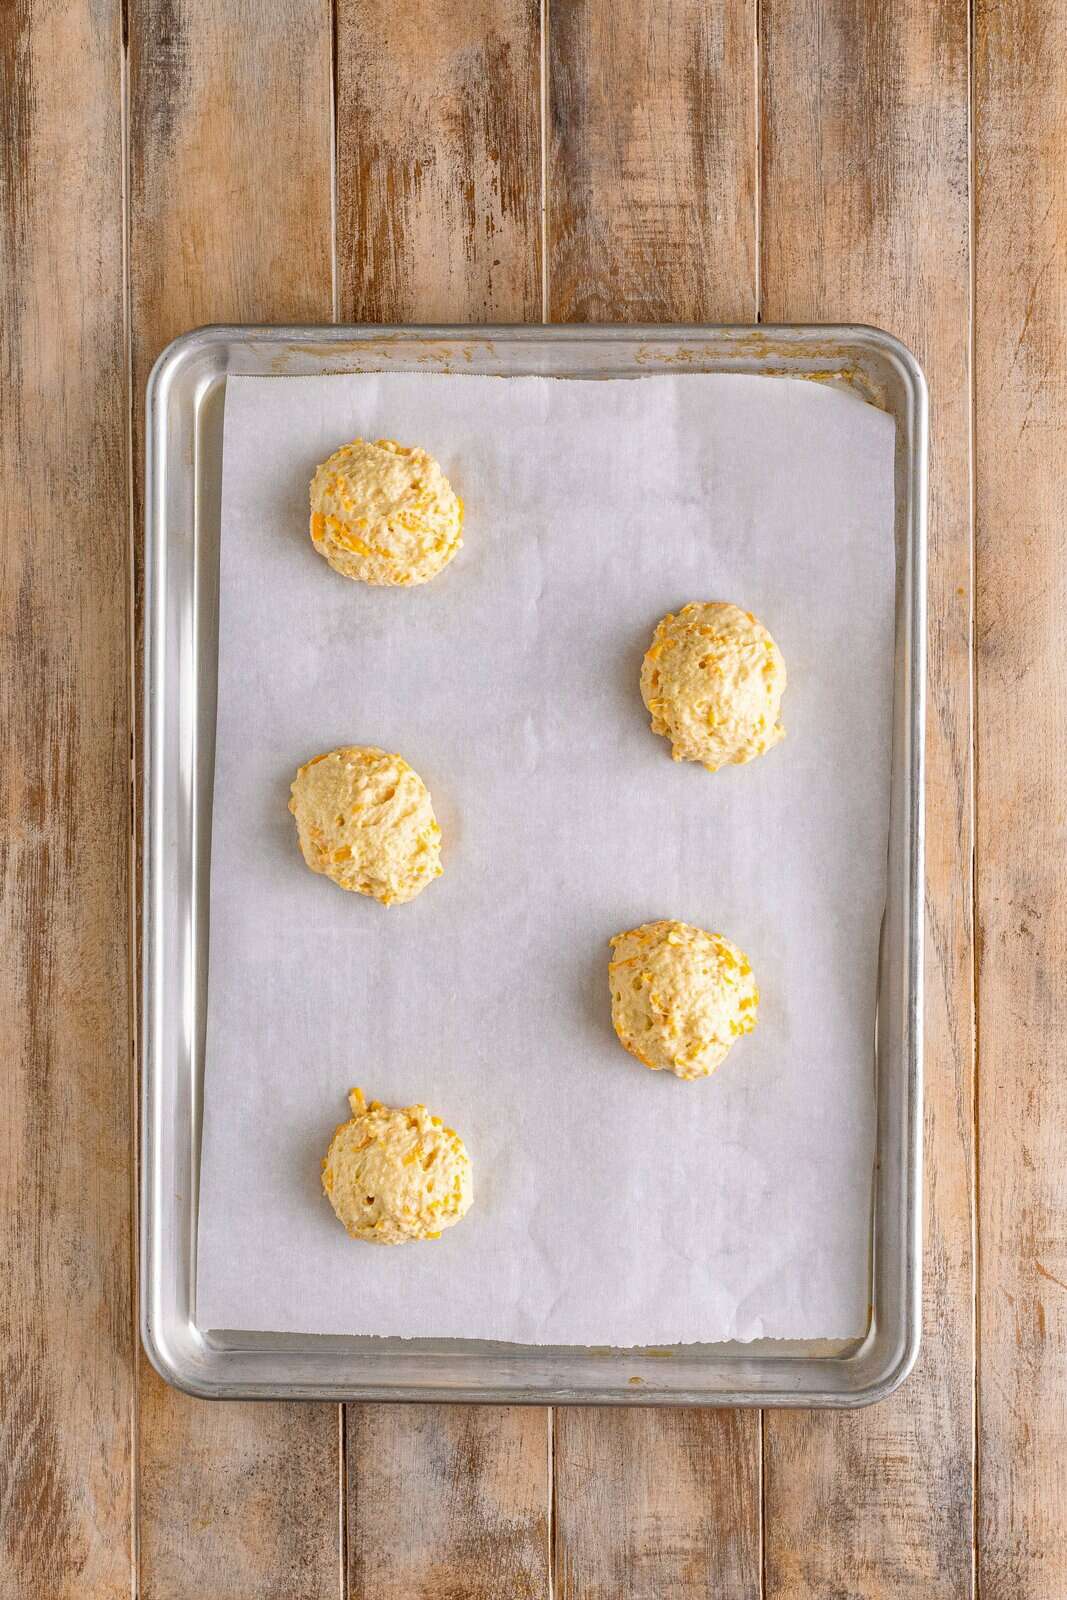 The parchment lined baking sheet with cheddar biscuit tables.